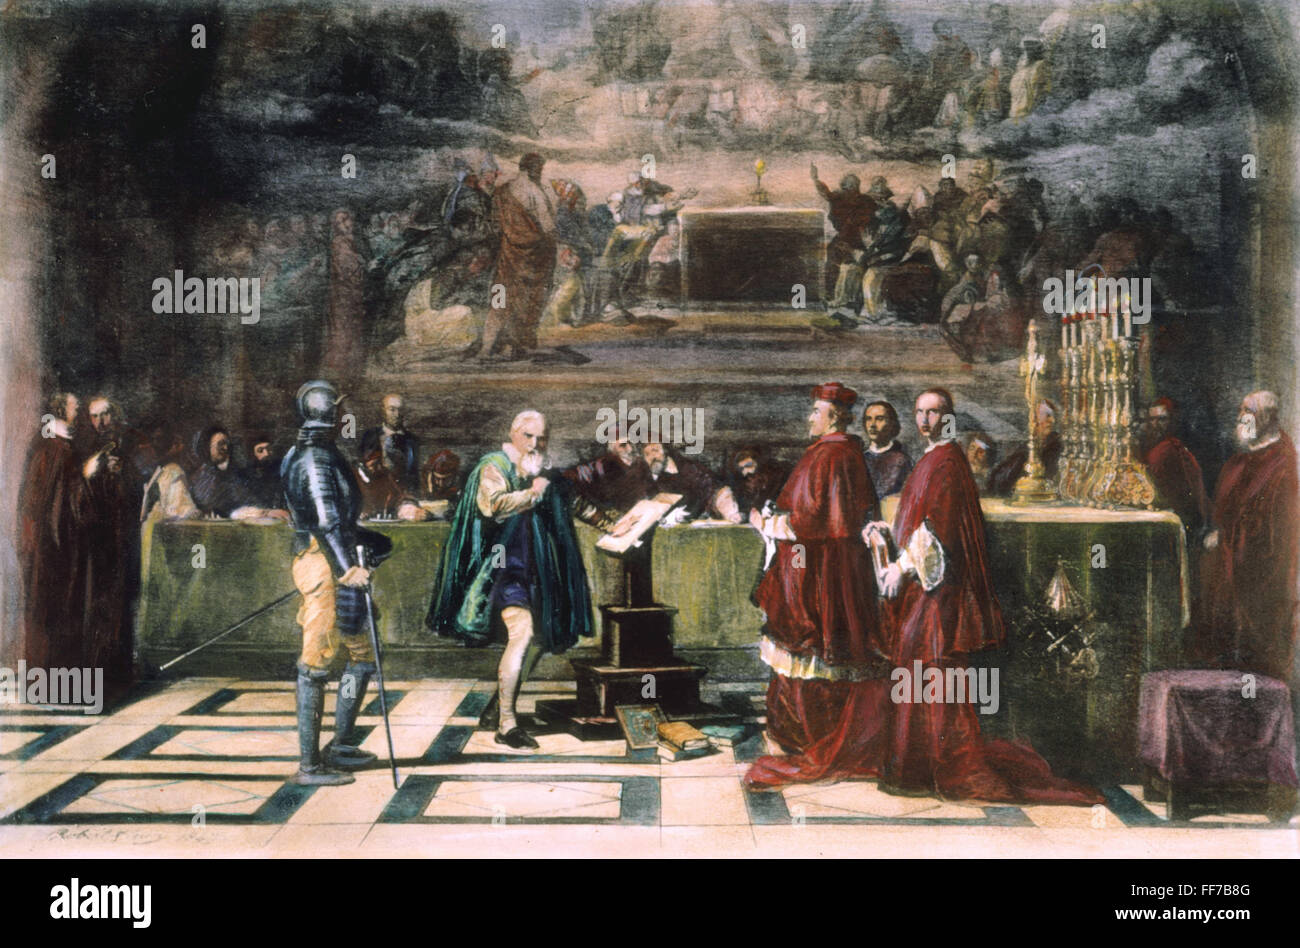 GALILEO GALILEI (1564-1642). /nGalileo before the Holy Office in 1633. After the painting, 1847, by Tony Robert-Fleury. Stock Photo